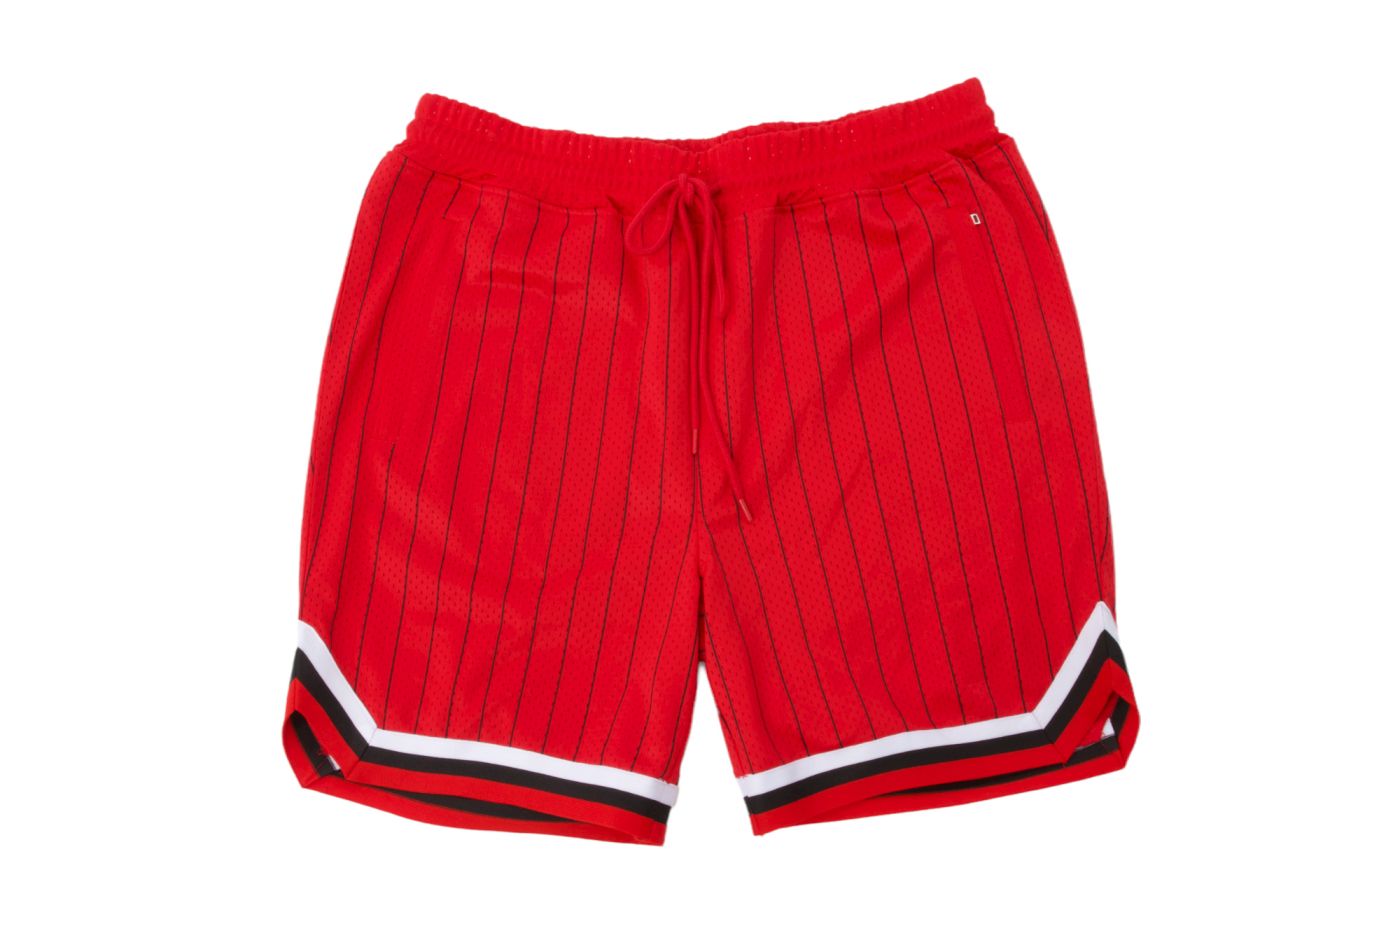 FBRK BASKETBALL SHORTS IN RED Red L FBRK-208673